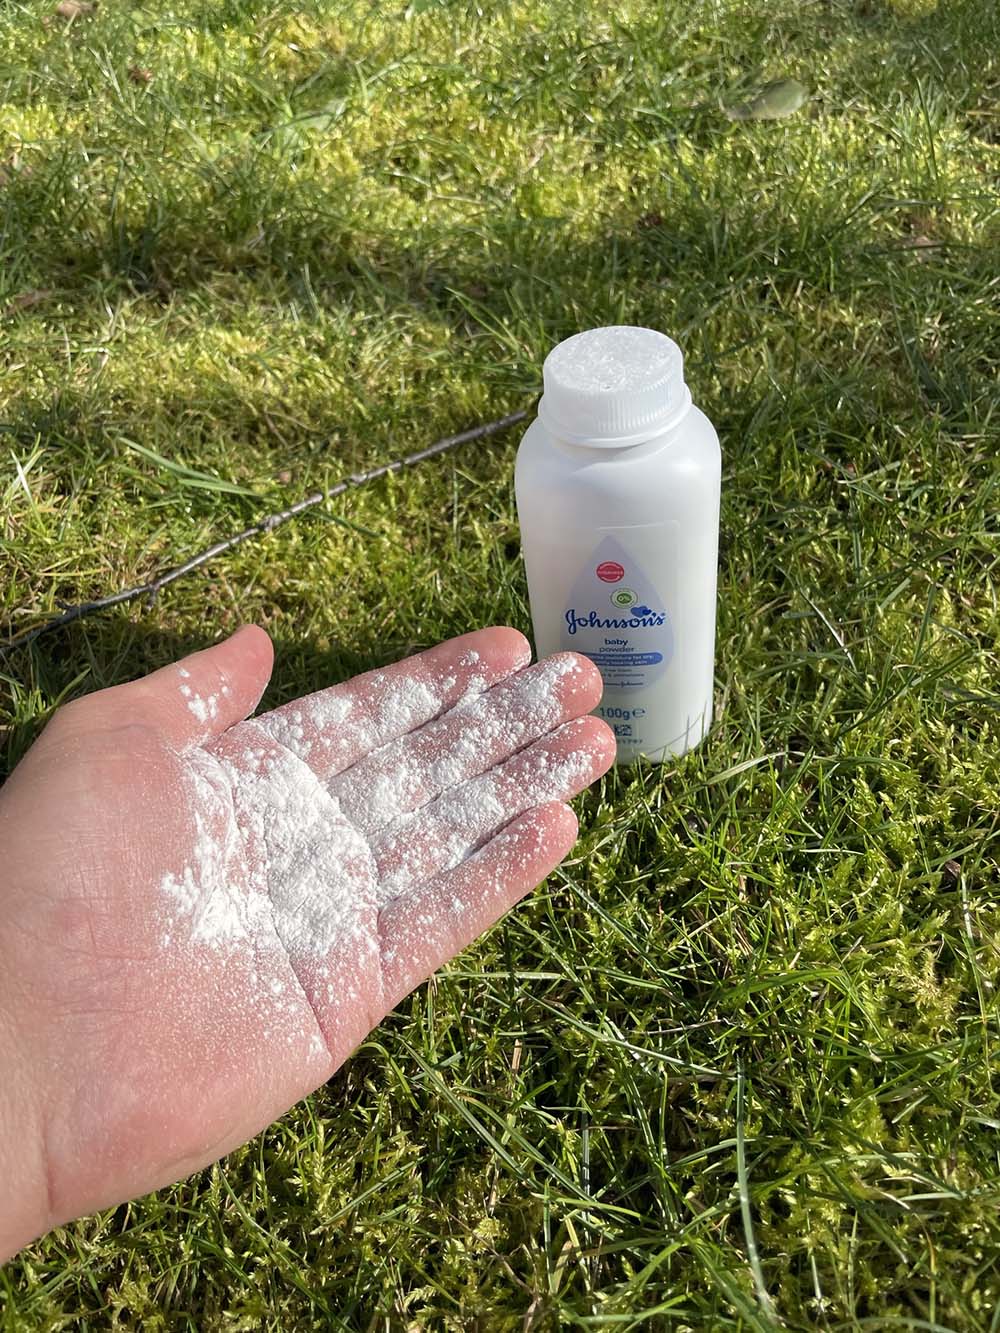 Take Off Gloves With Baby Powder Easily